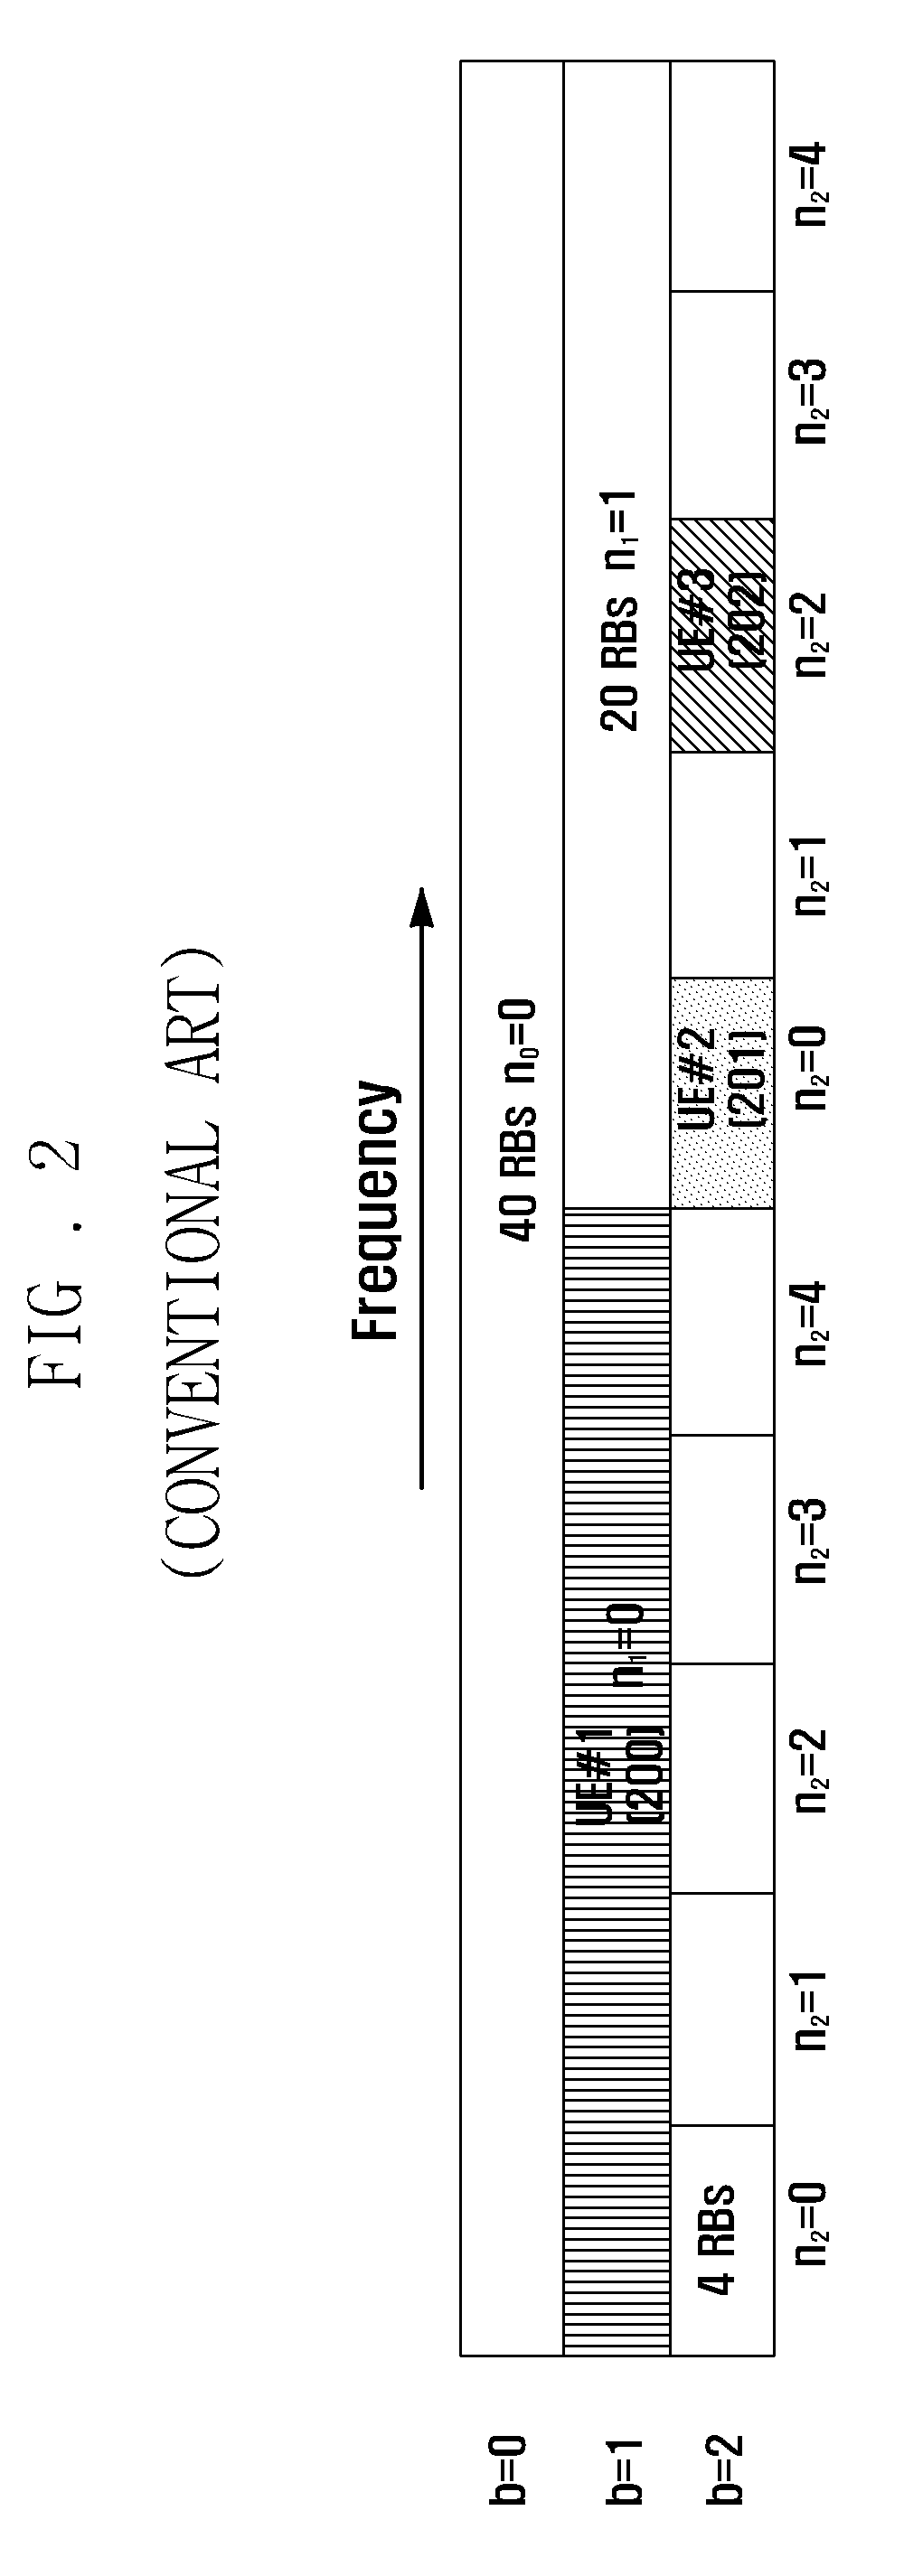 Apparatus and method for transmission of sounding reference signal in uplink wireless communication systems with multiple antennas and sounding reference signal hopping